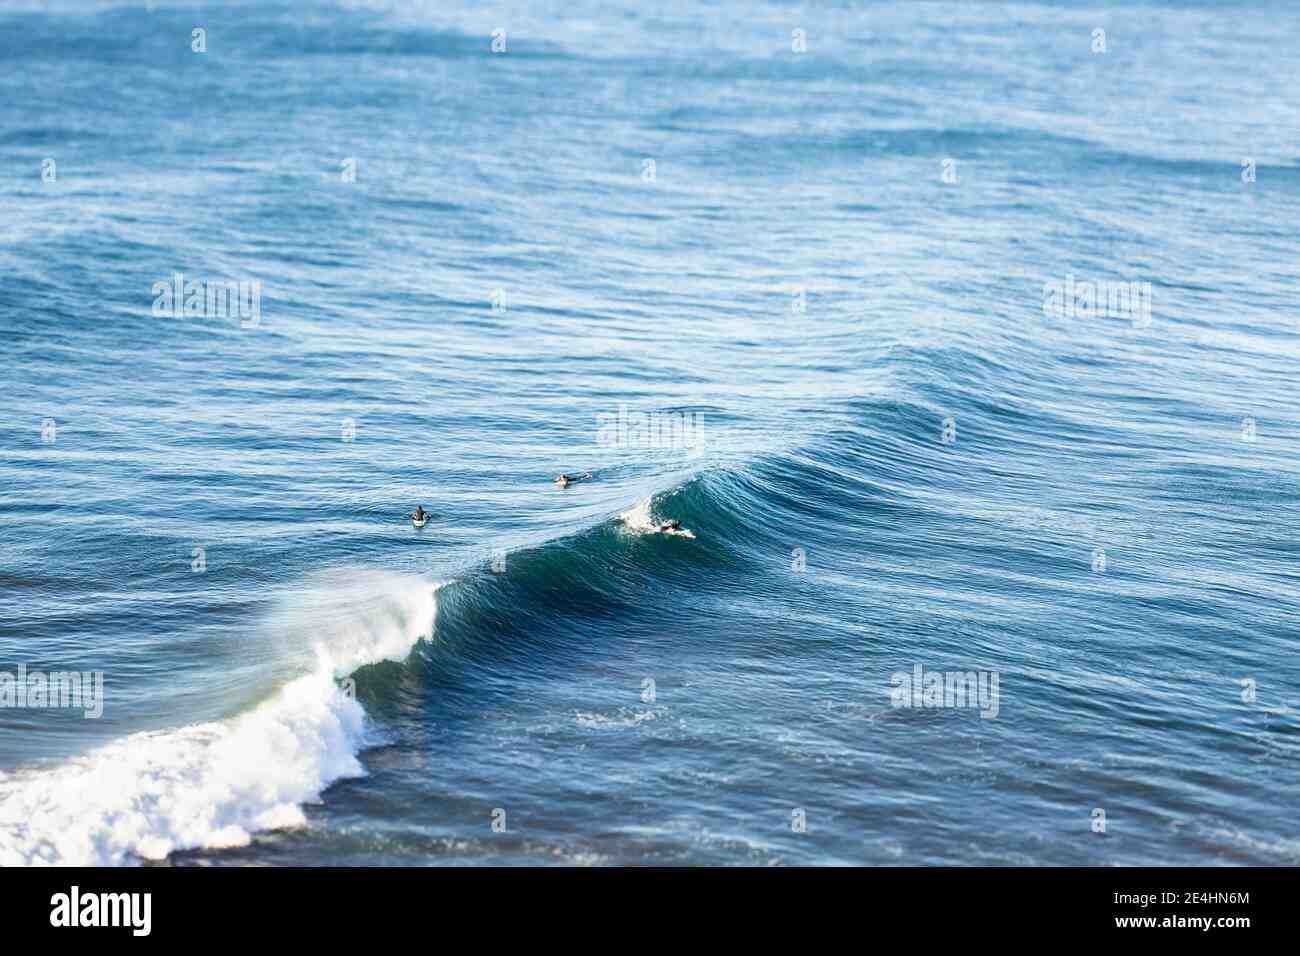 What part of the ocean has the biggest waves?